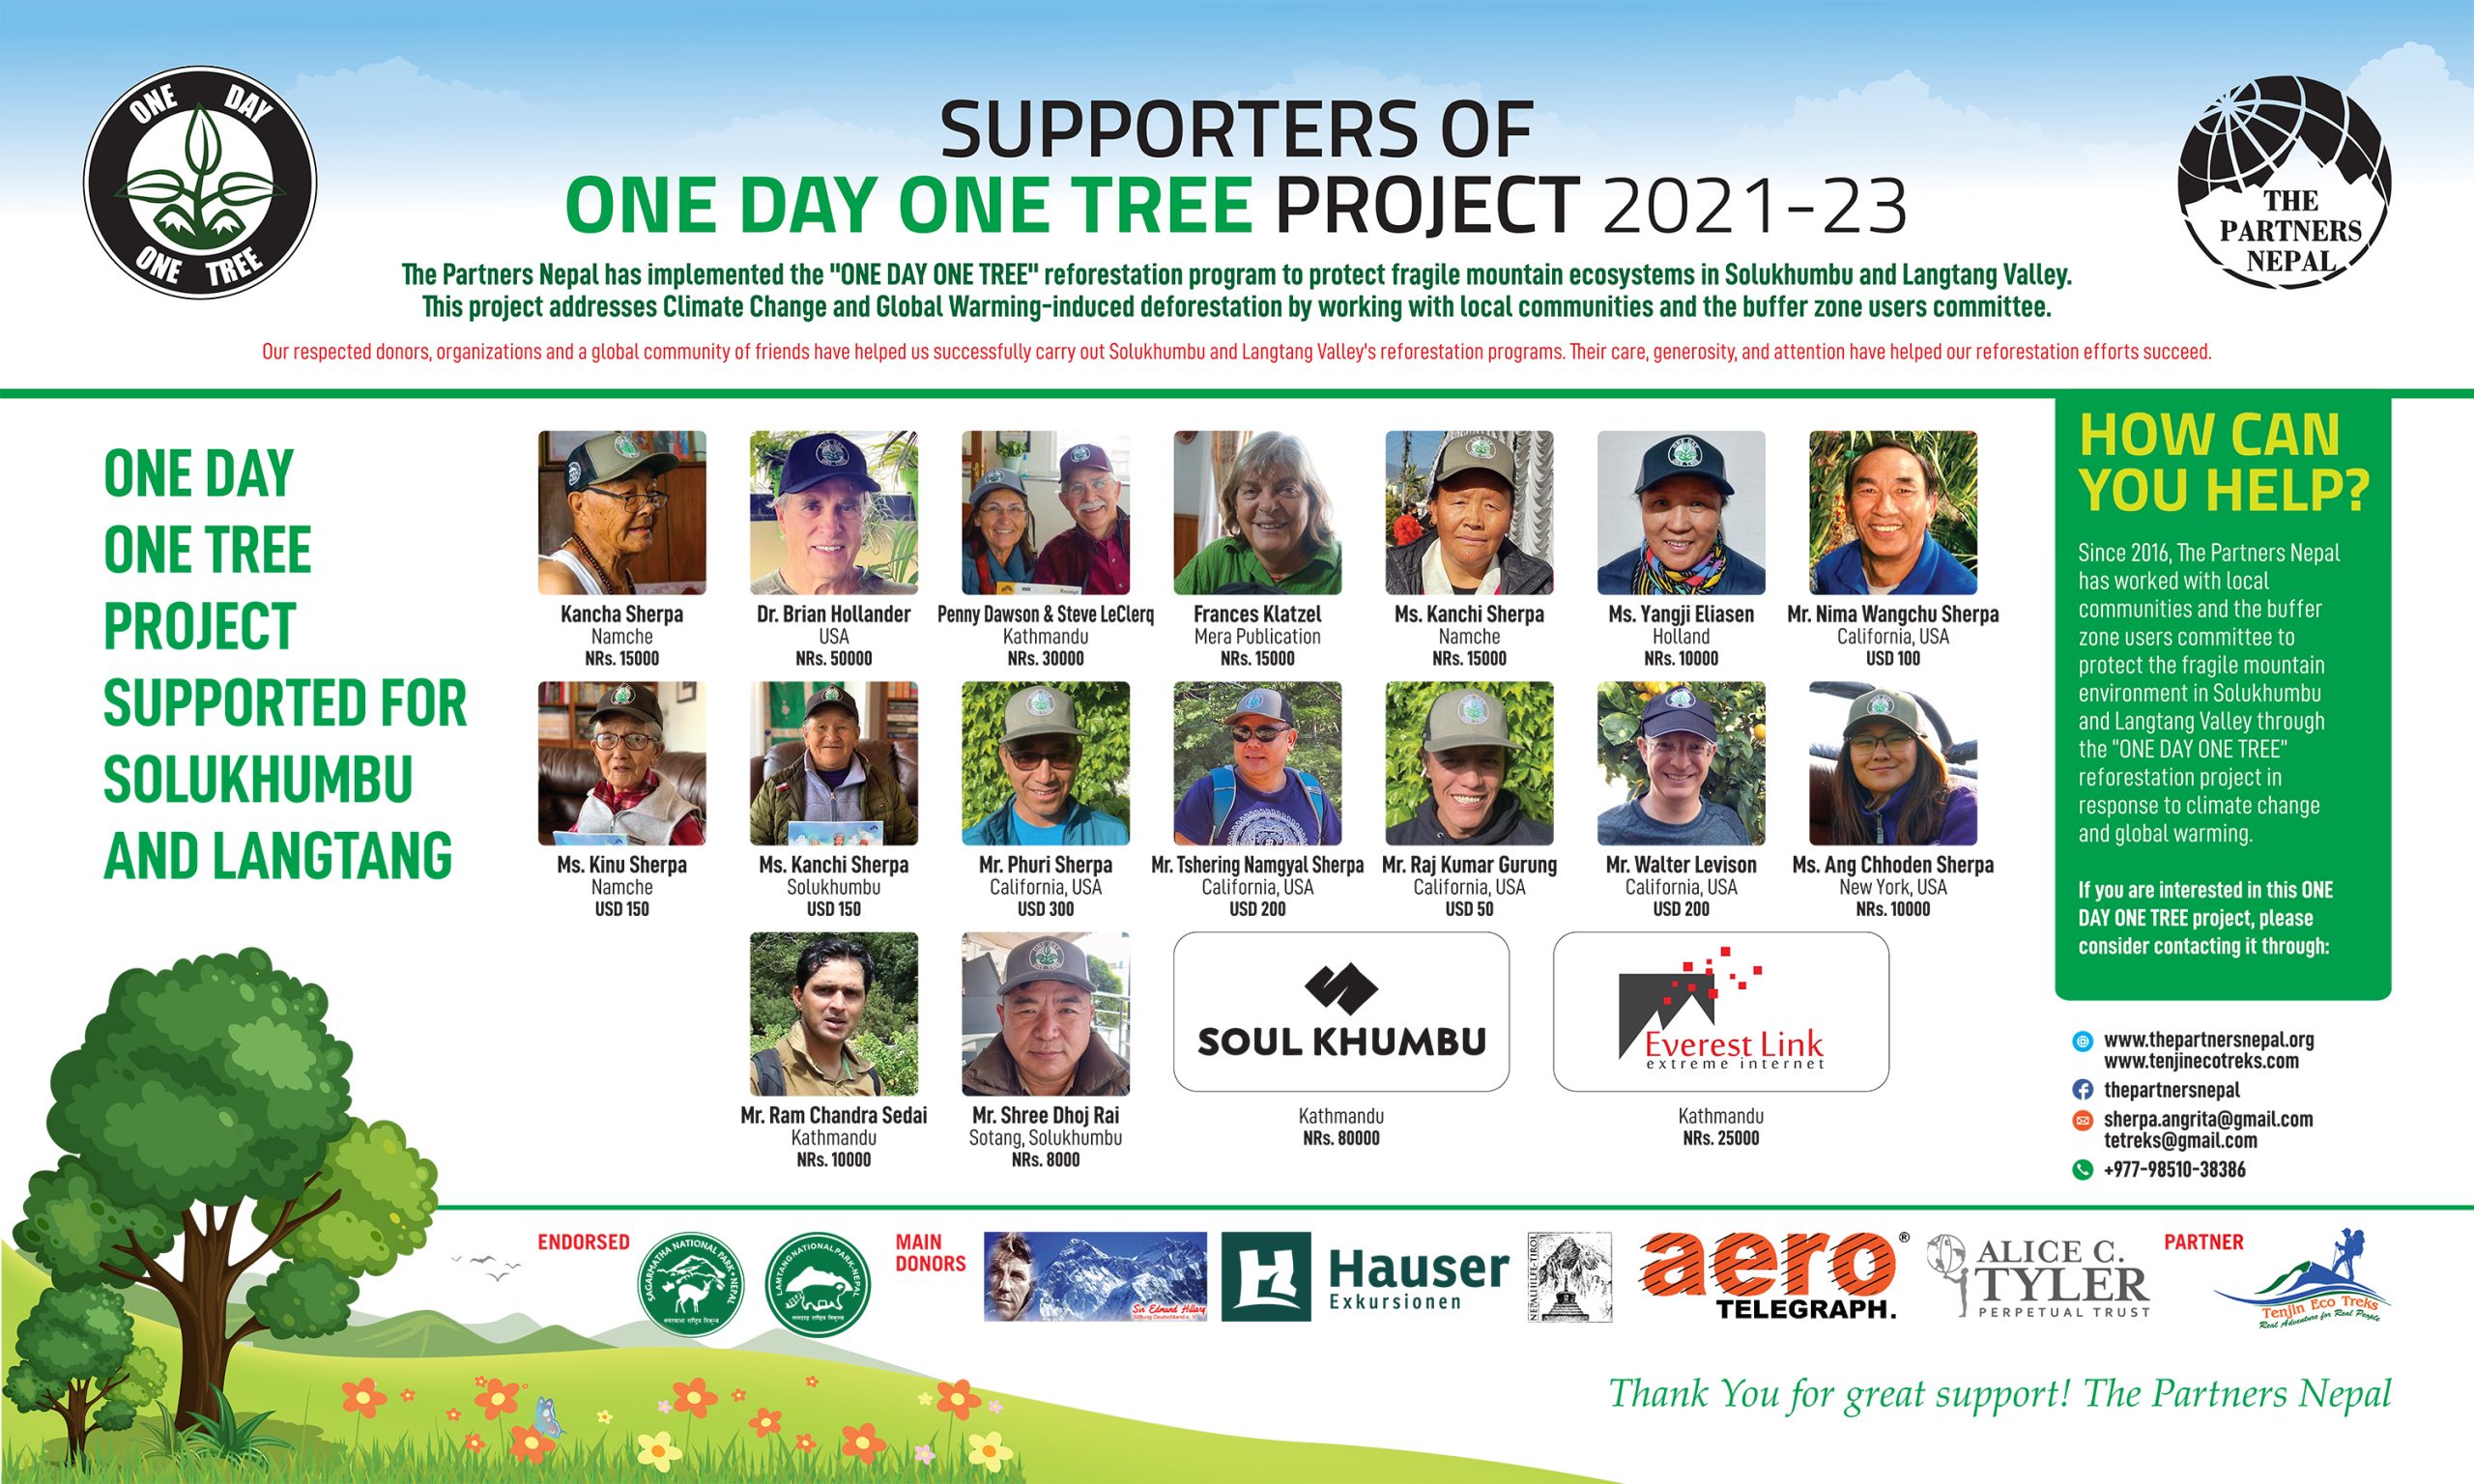 Supporters of One Day One tree 2021-2023